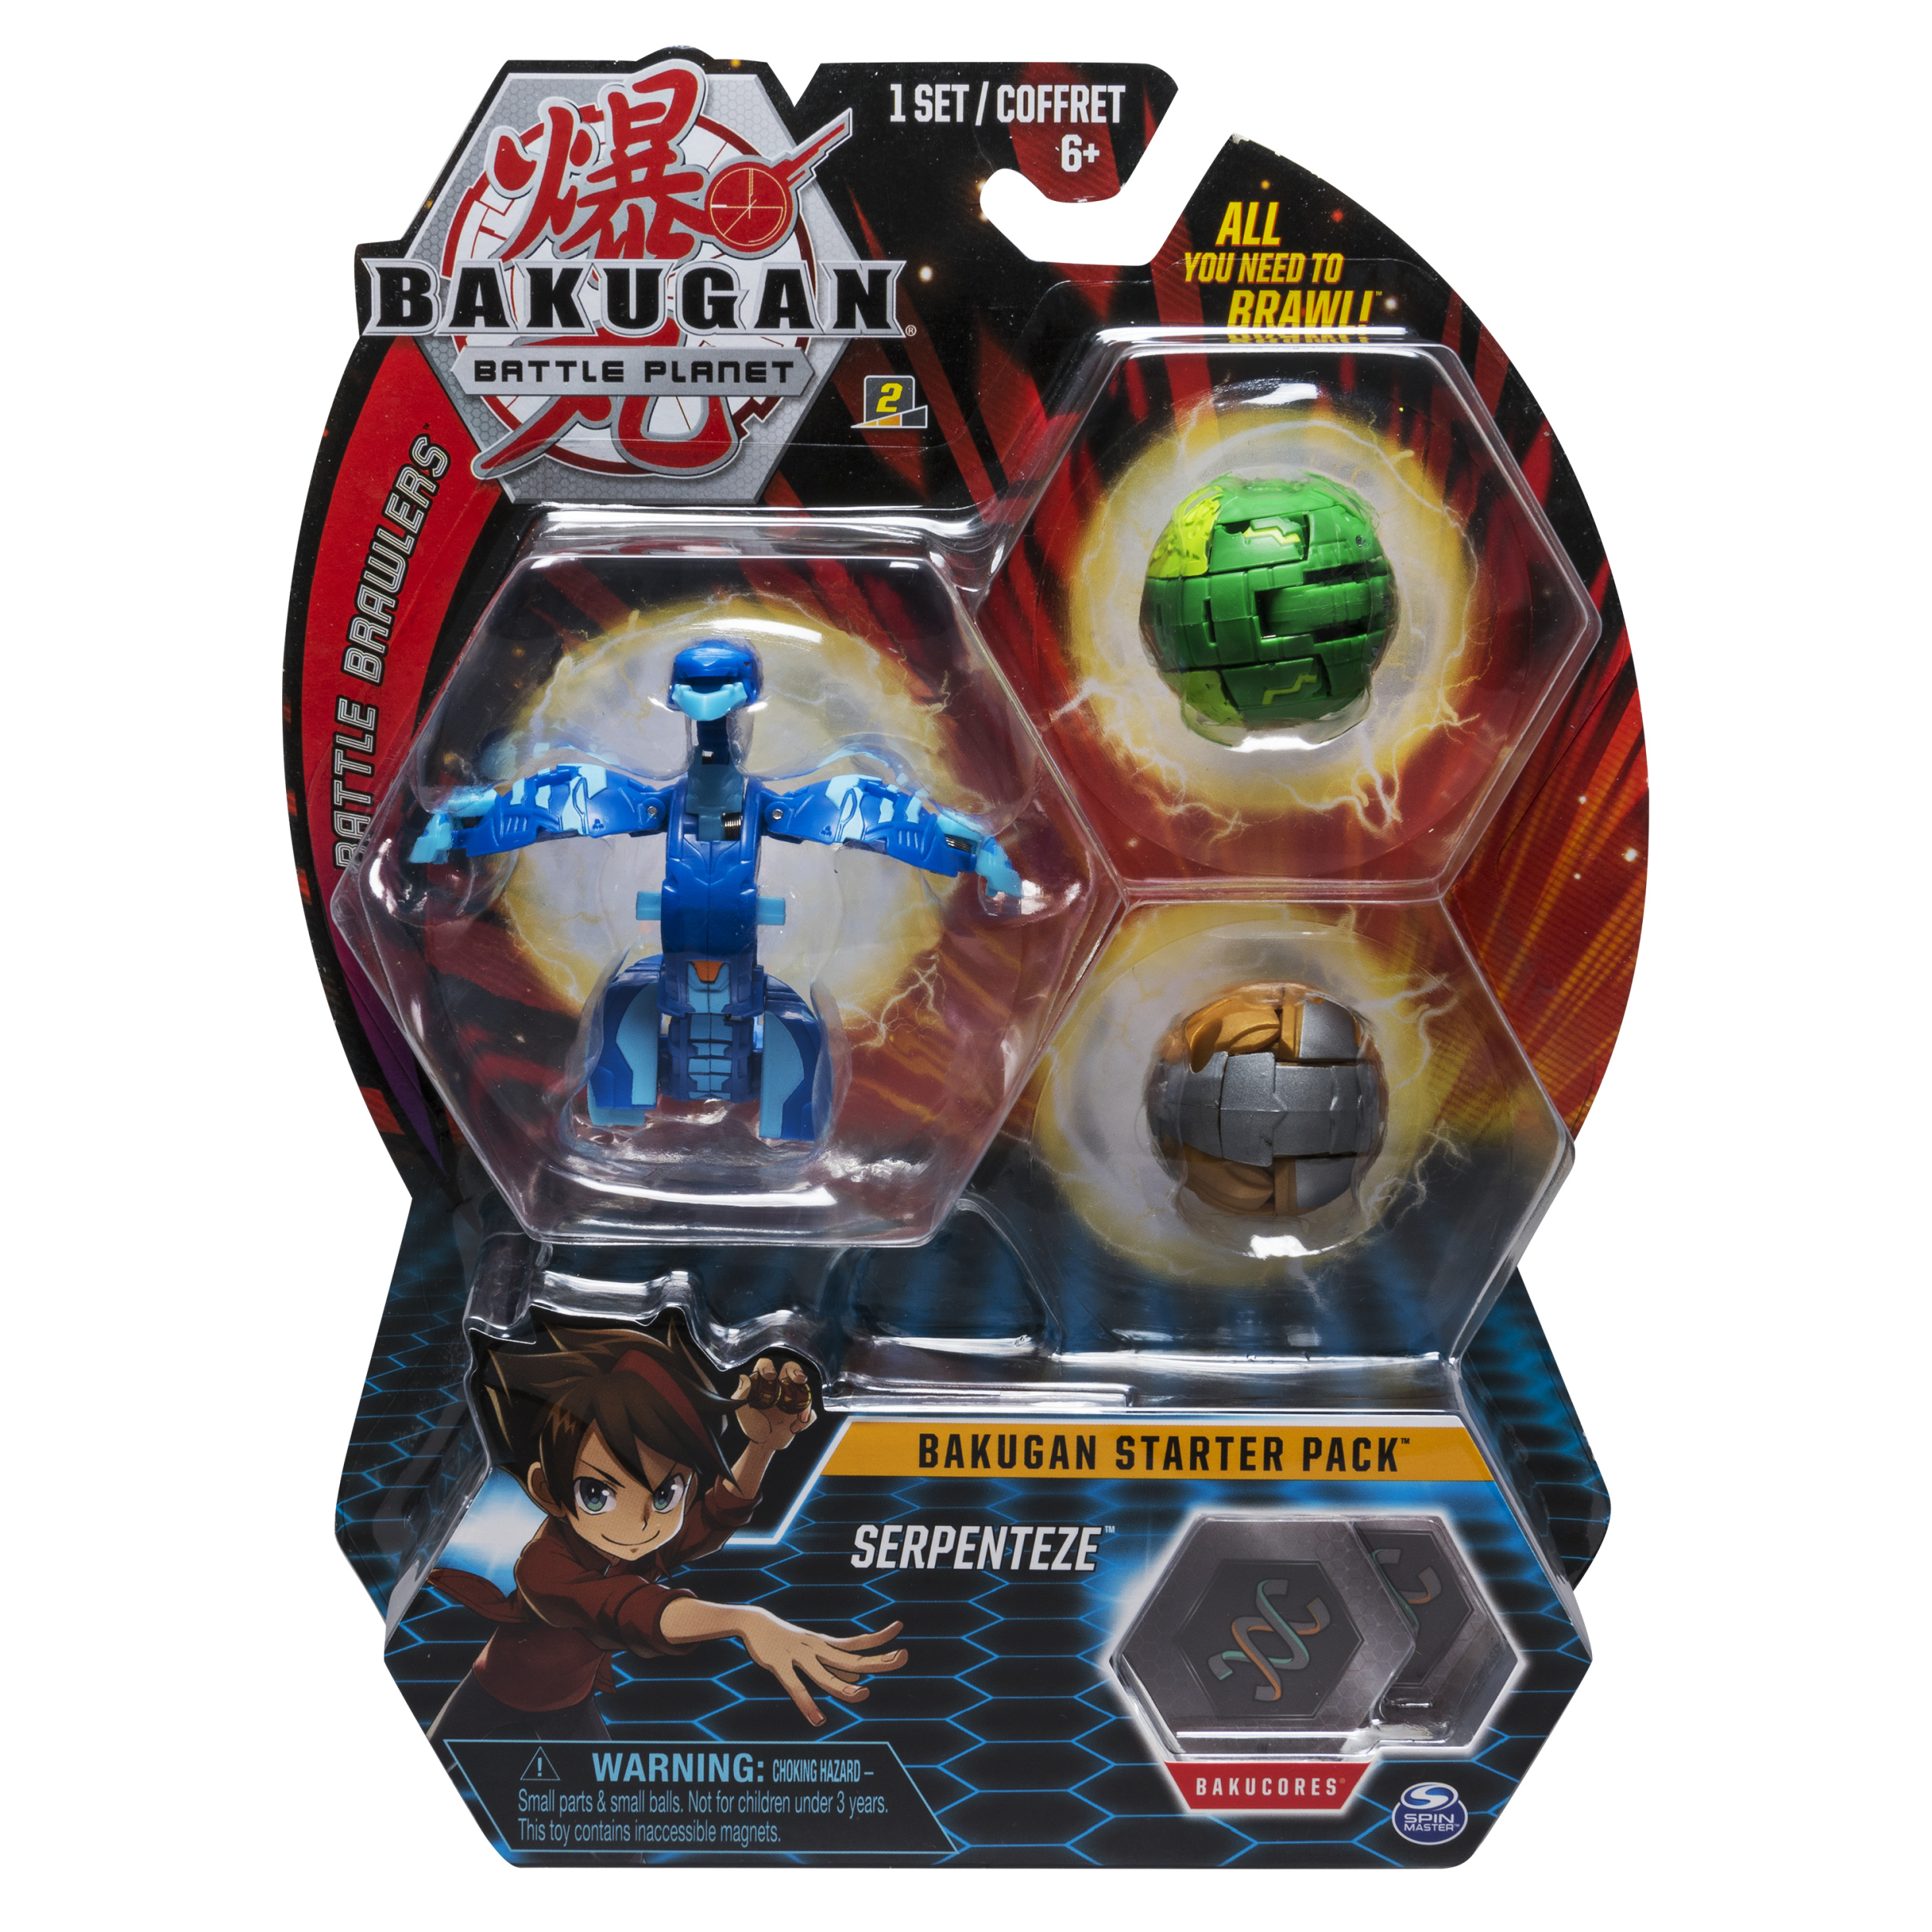 Bakugan Starter Pack 3-Pack, Serpenteze, Collectible Action Figures, for Ages 6 and Up - image 1 of 9